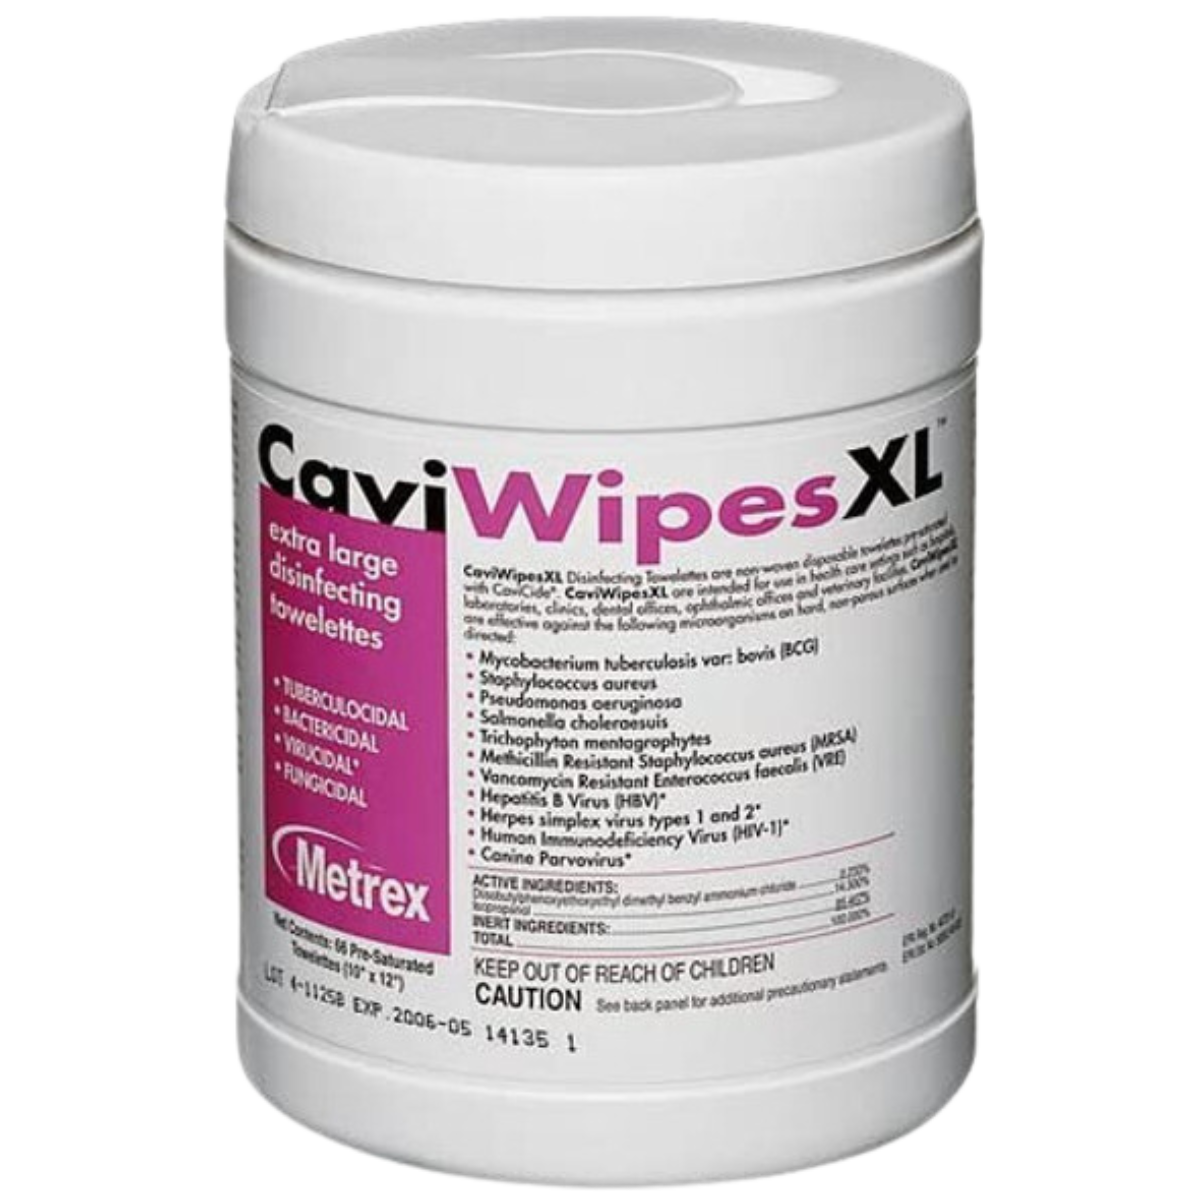 Metrex CaviWipes™ XL Disinfecting Towelettes